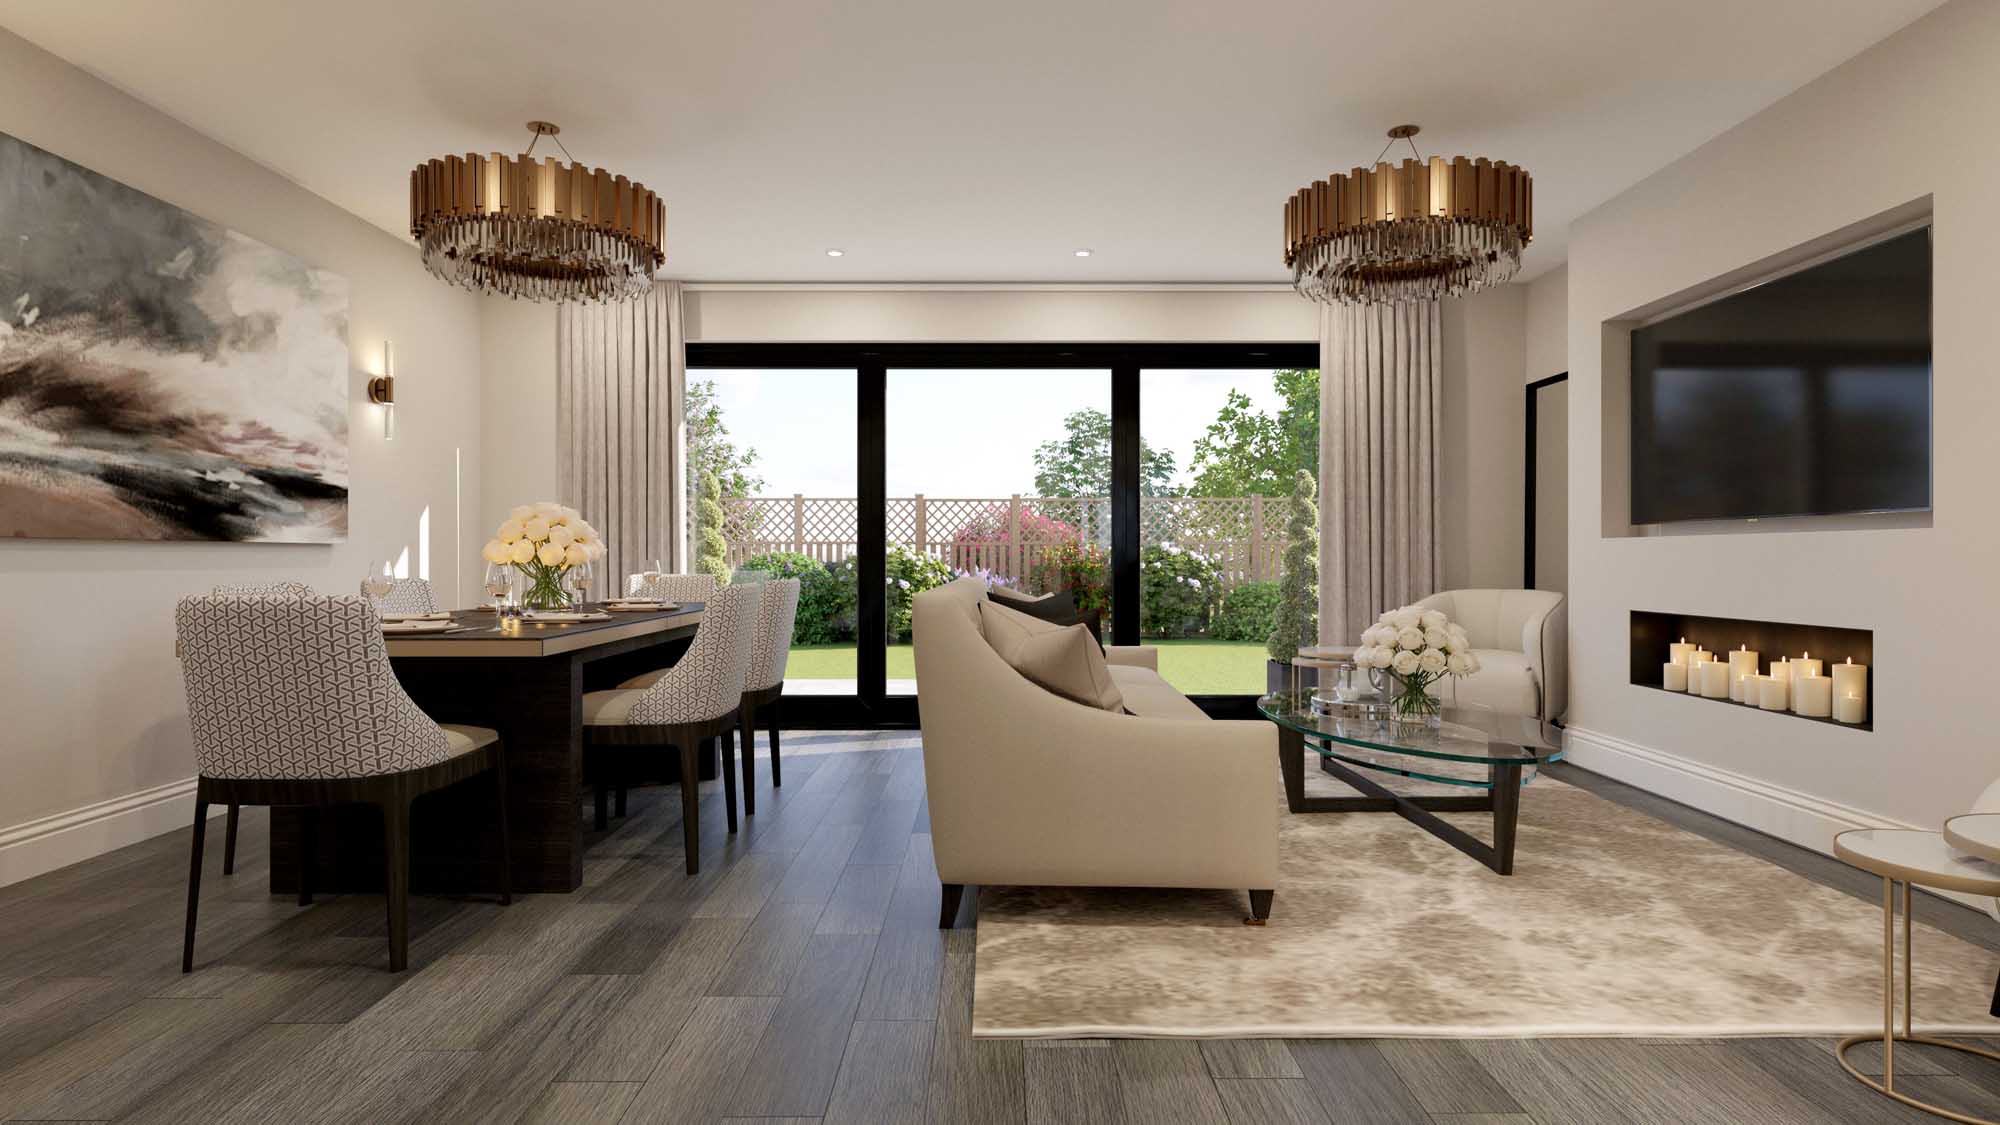 Amara Property launches luxurious Parisian-inspired residences in Hendon NW4